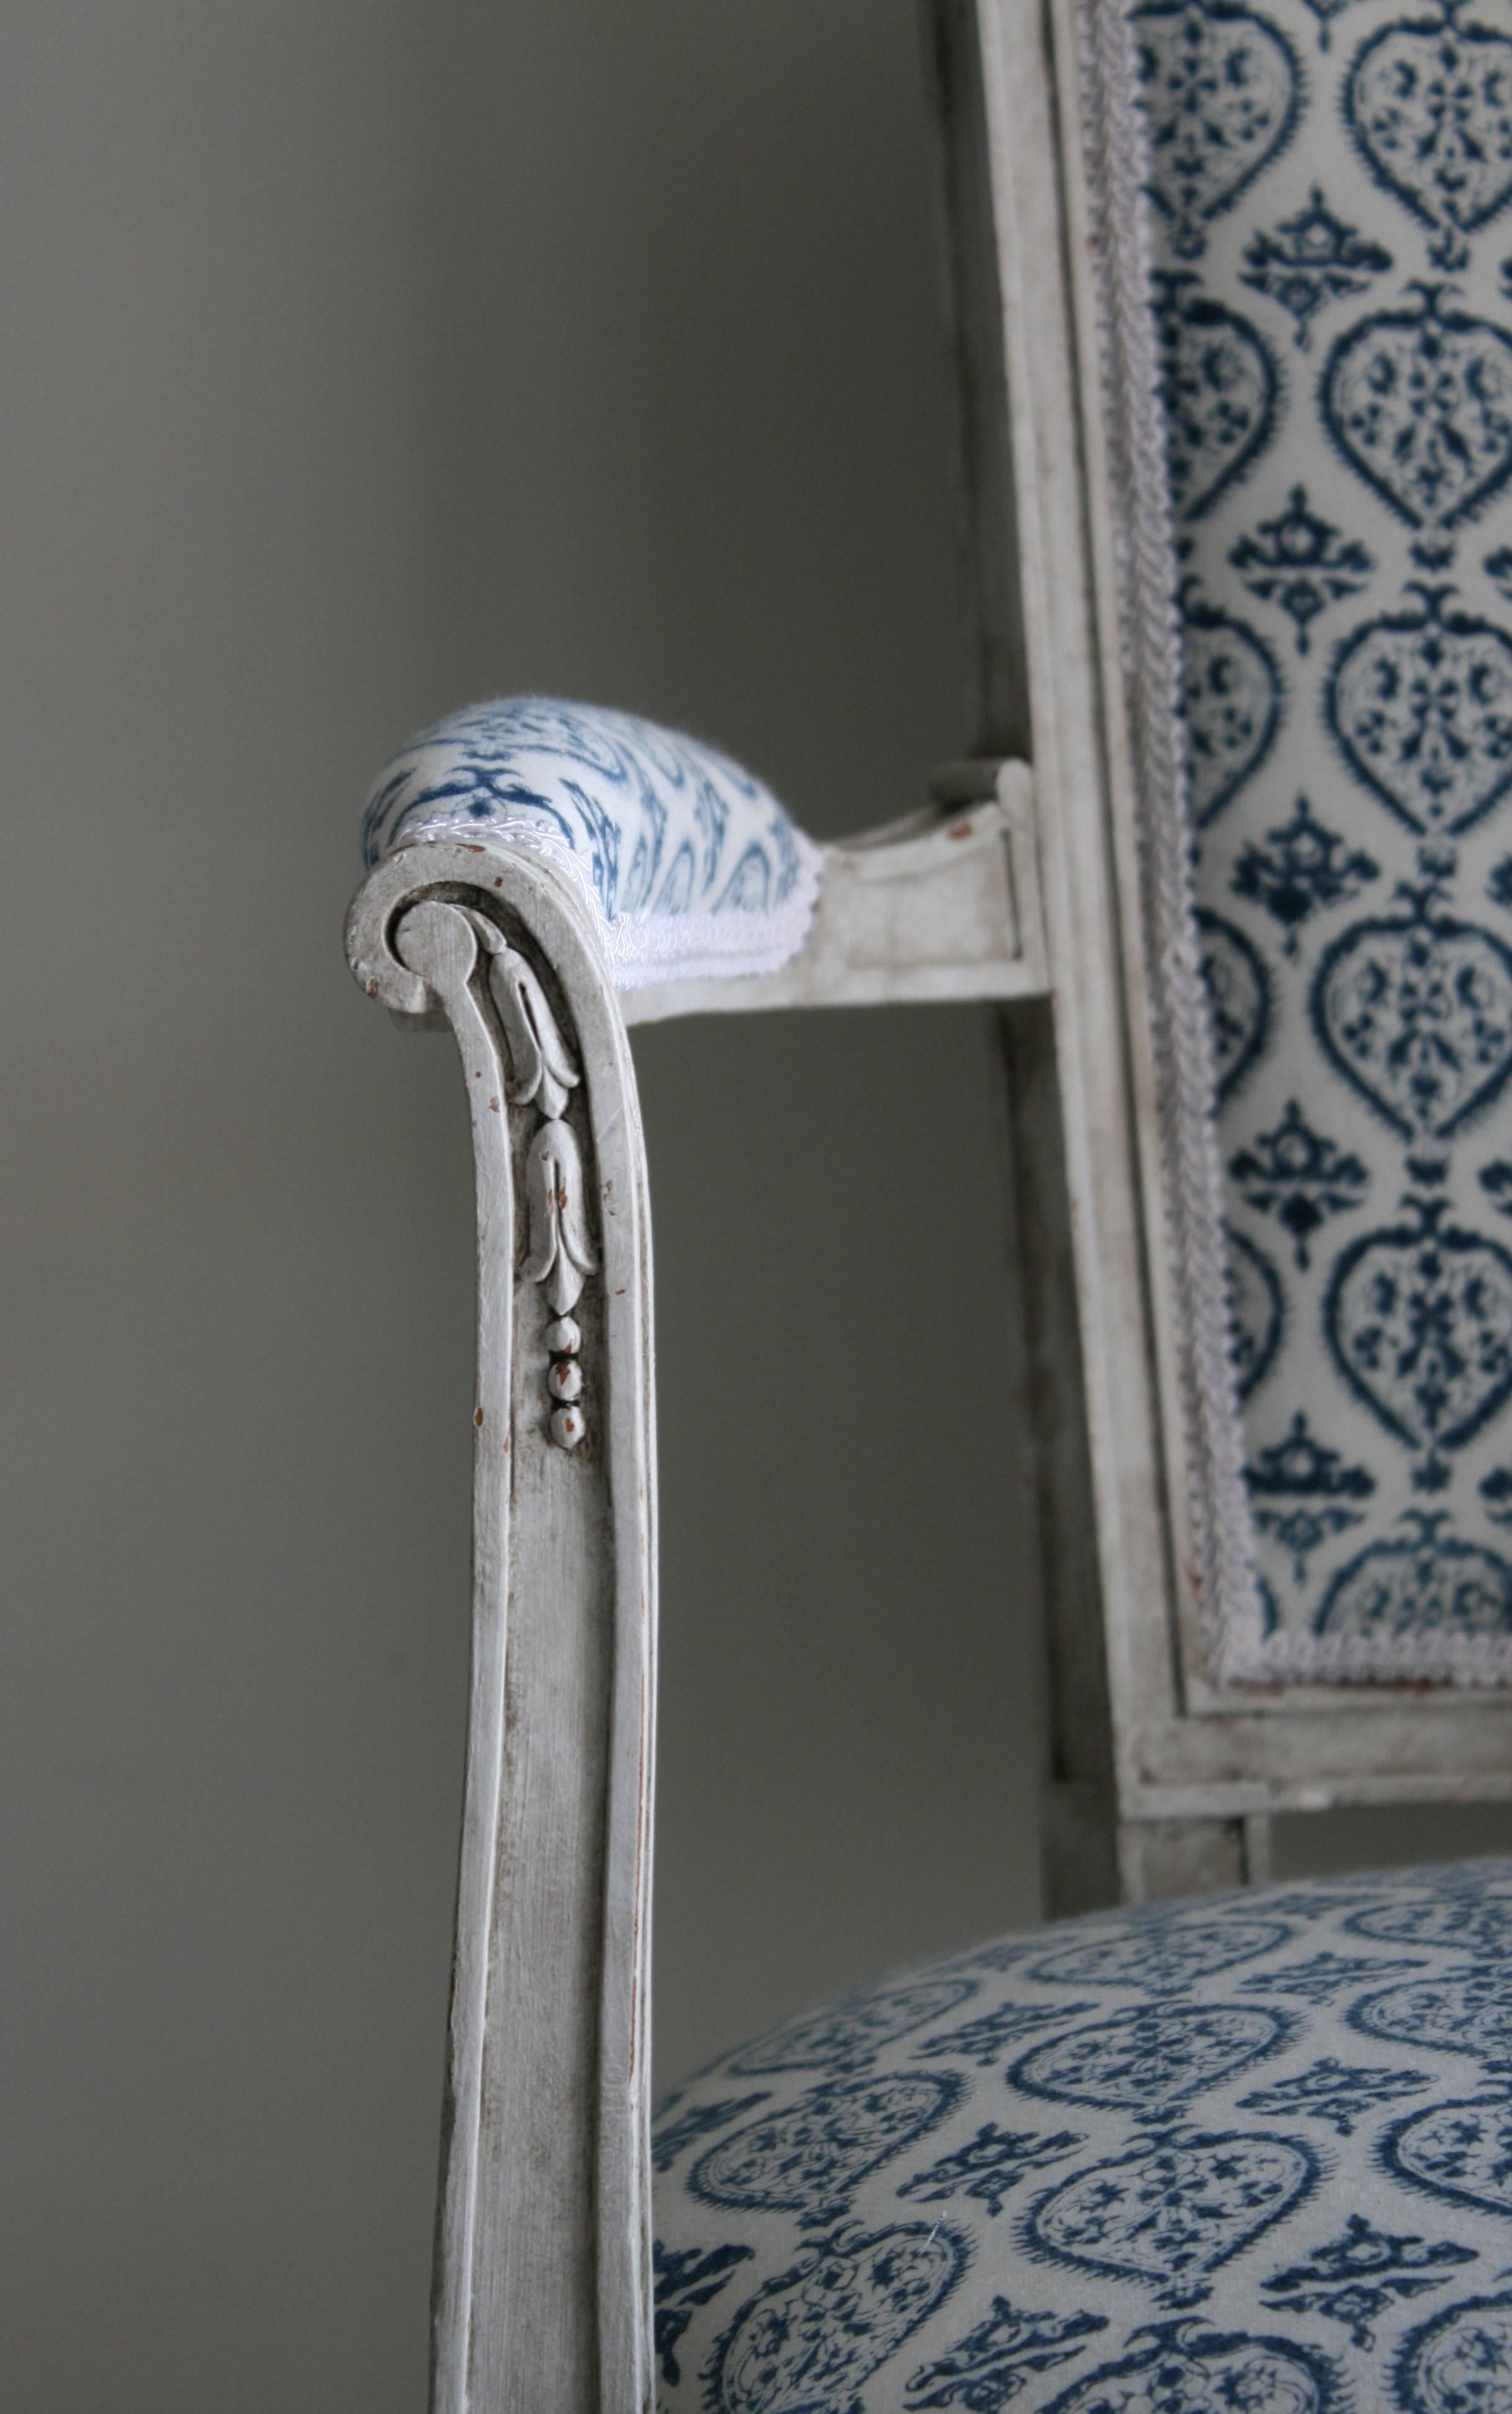 This antique chair is a little gem. Newly upholstered in an organic hand, block-printed French-Indian cotton fabric (indigo against soft white) from Les Indiennes. The antique frame was painted in a soft Swedish grey, with an aged finish that gives